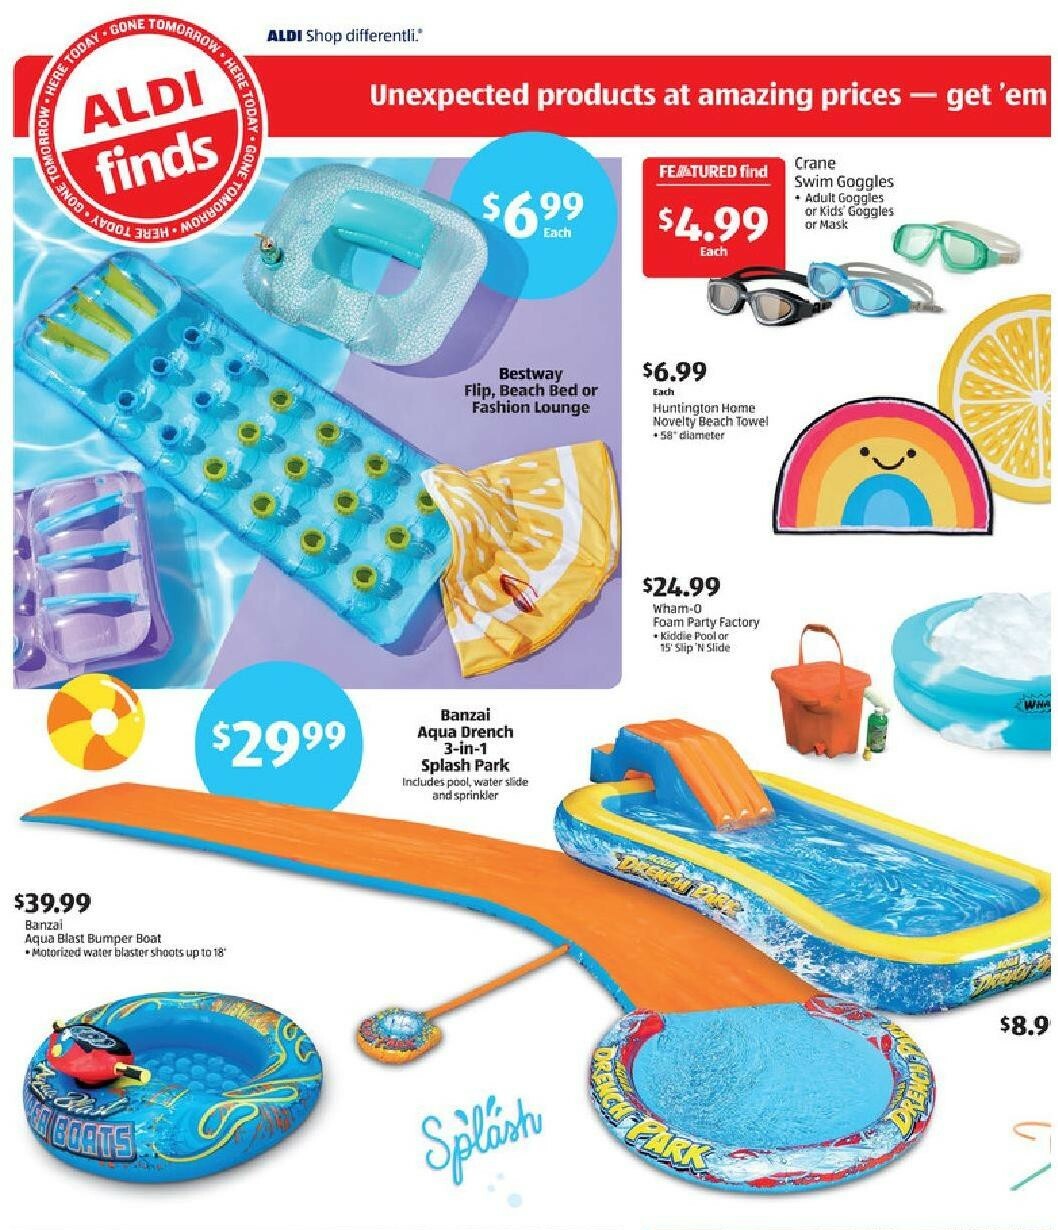 ALDI Weekly Ad from June 27